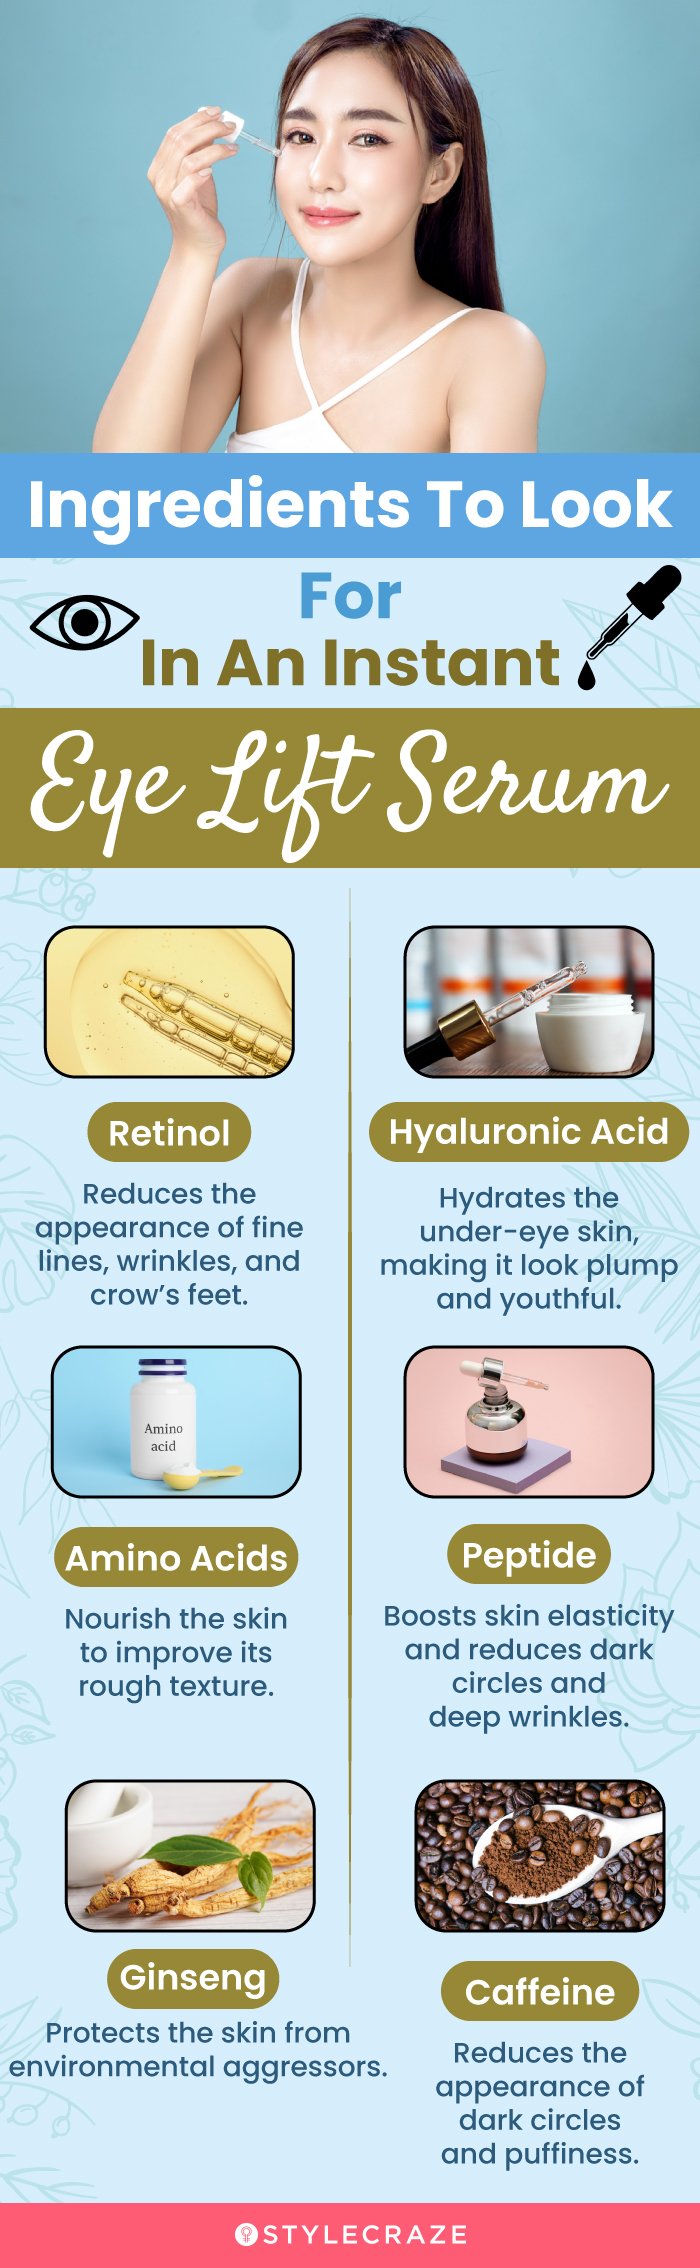 Ingredients To Look For In An Instant Eye Lift Serum (infographic)